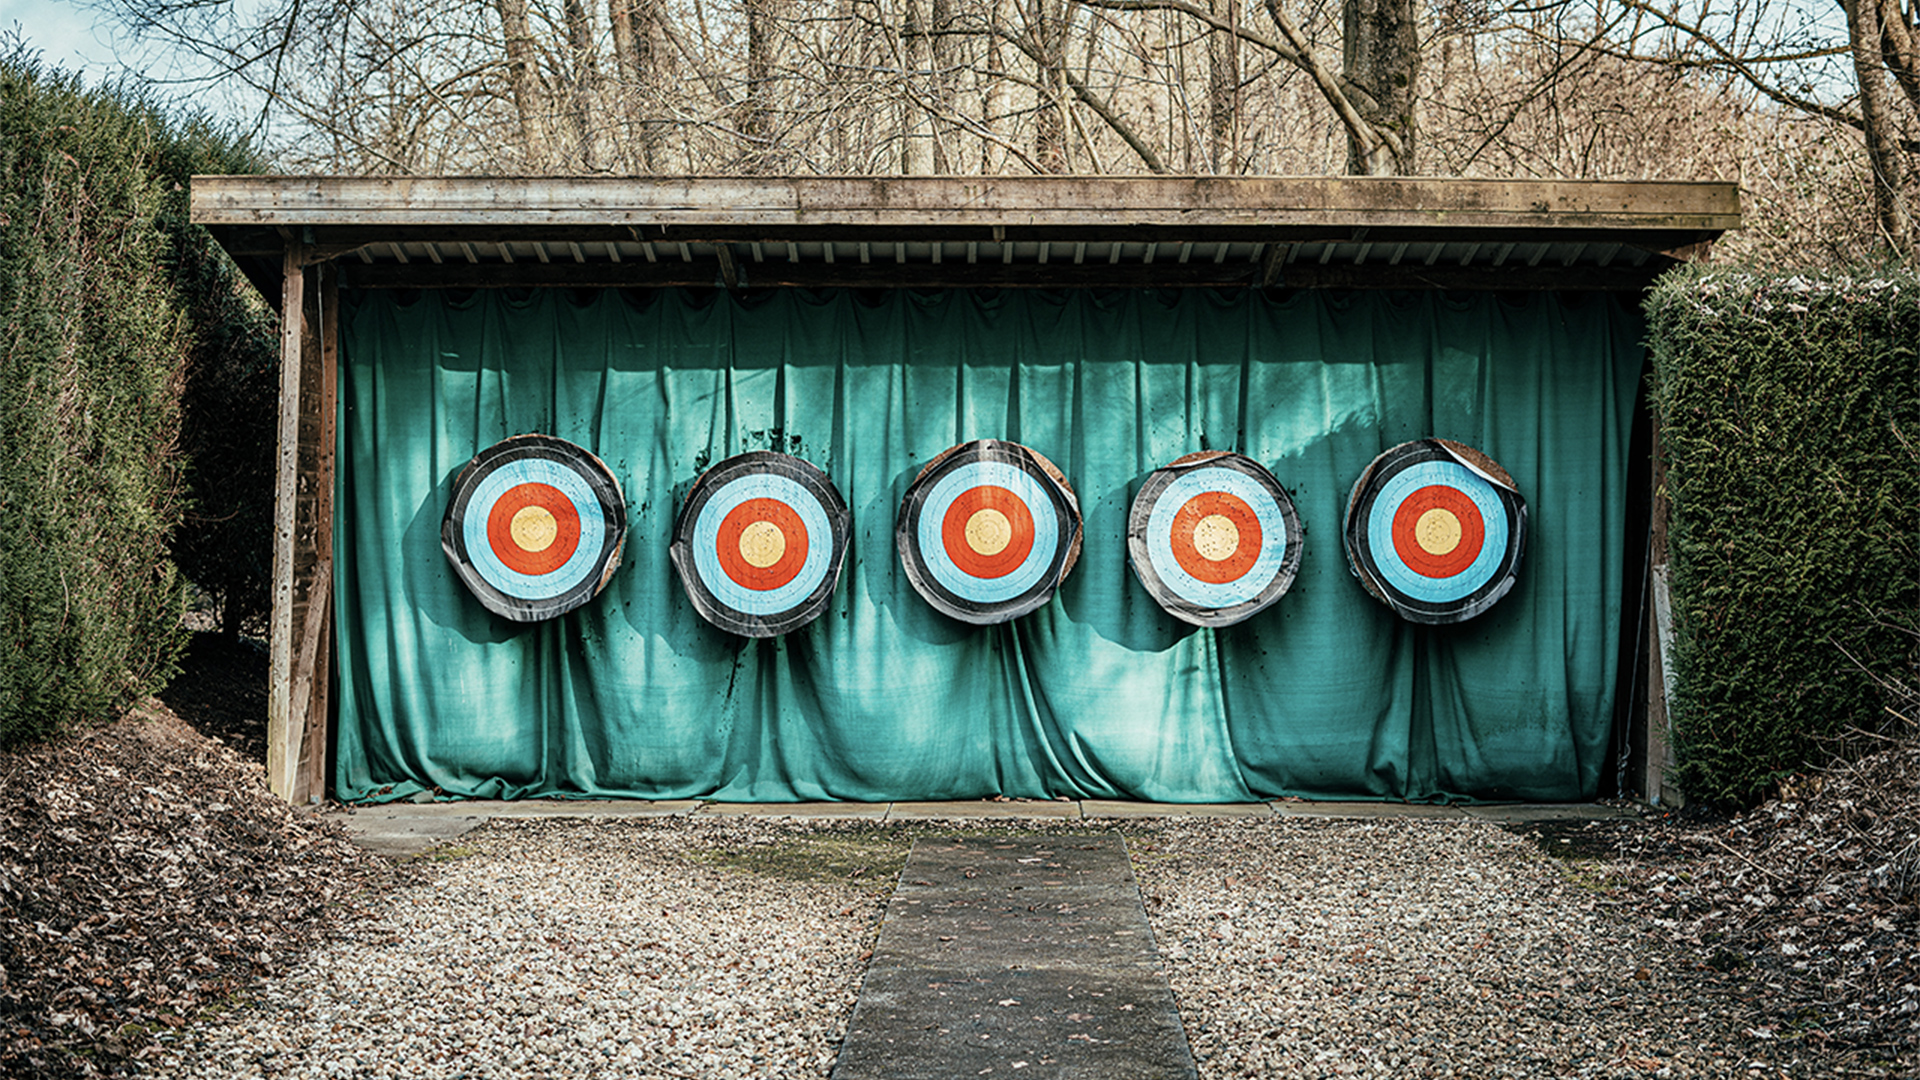 A row of targets for ranged weapons